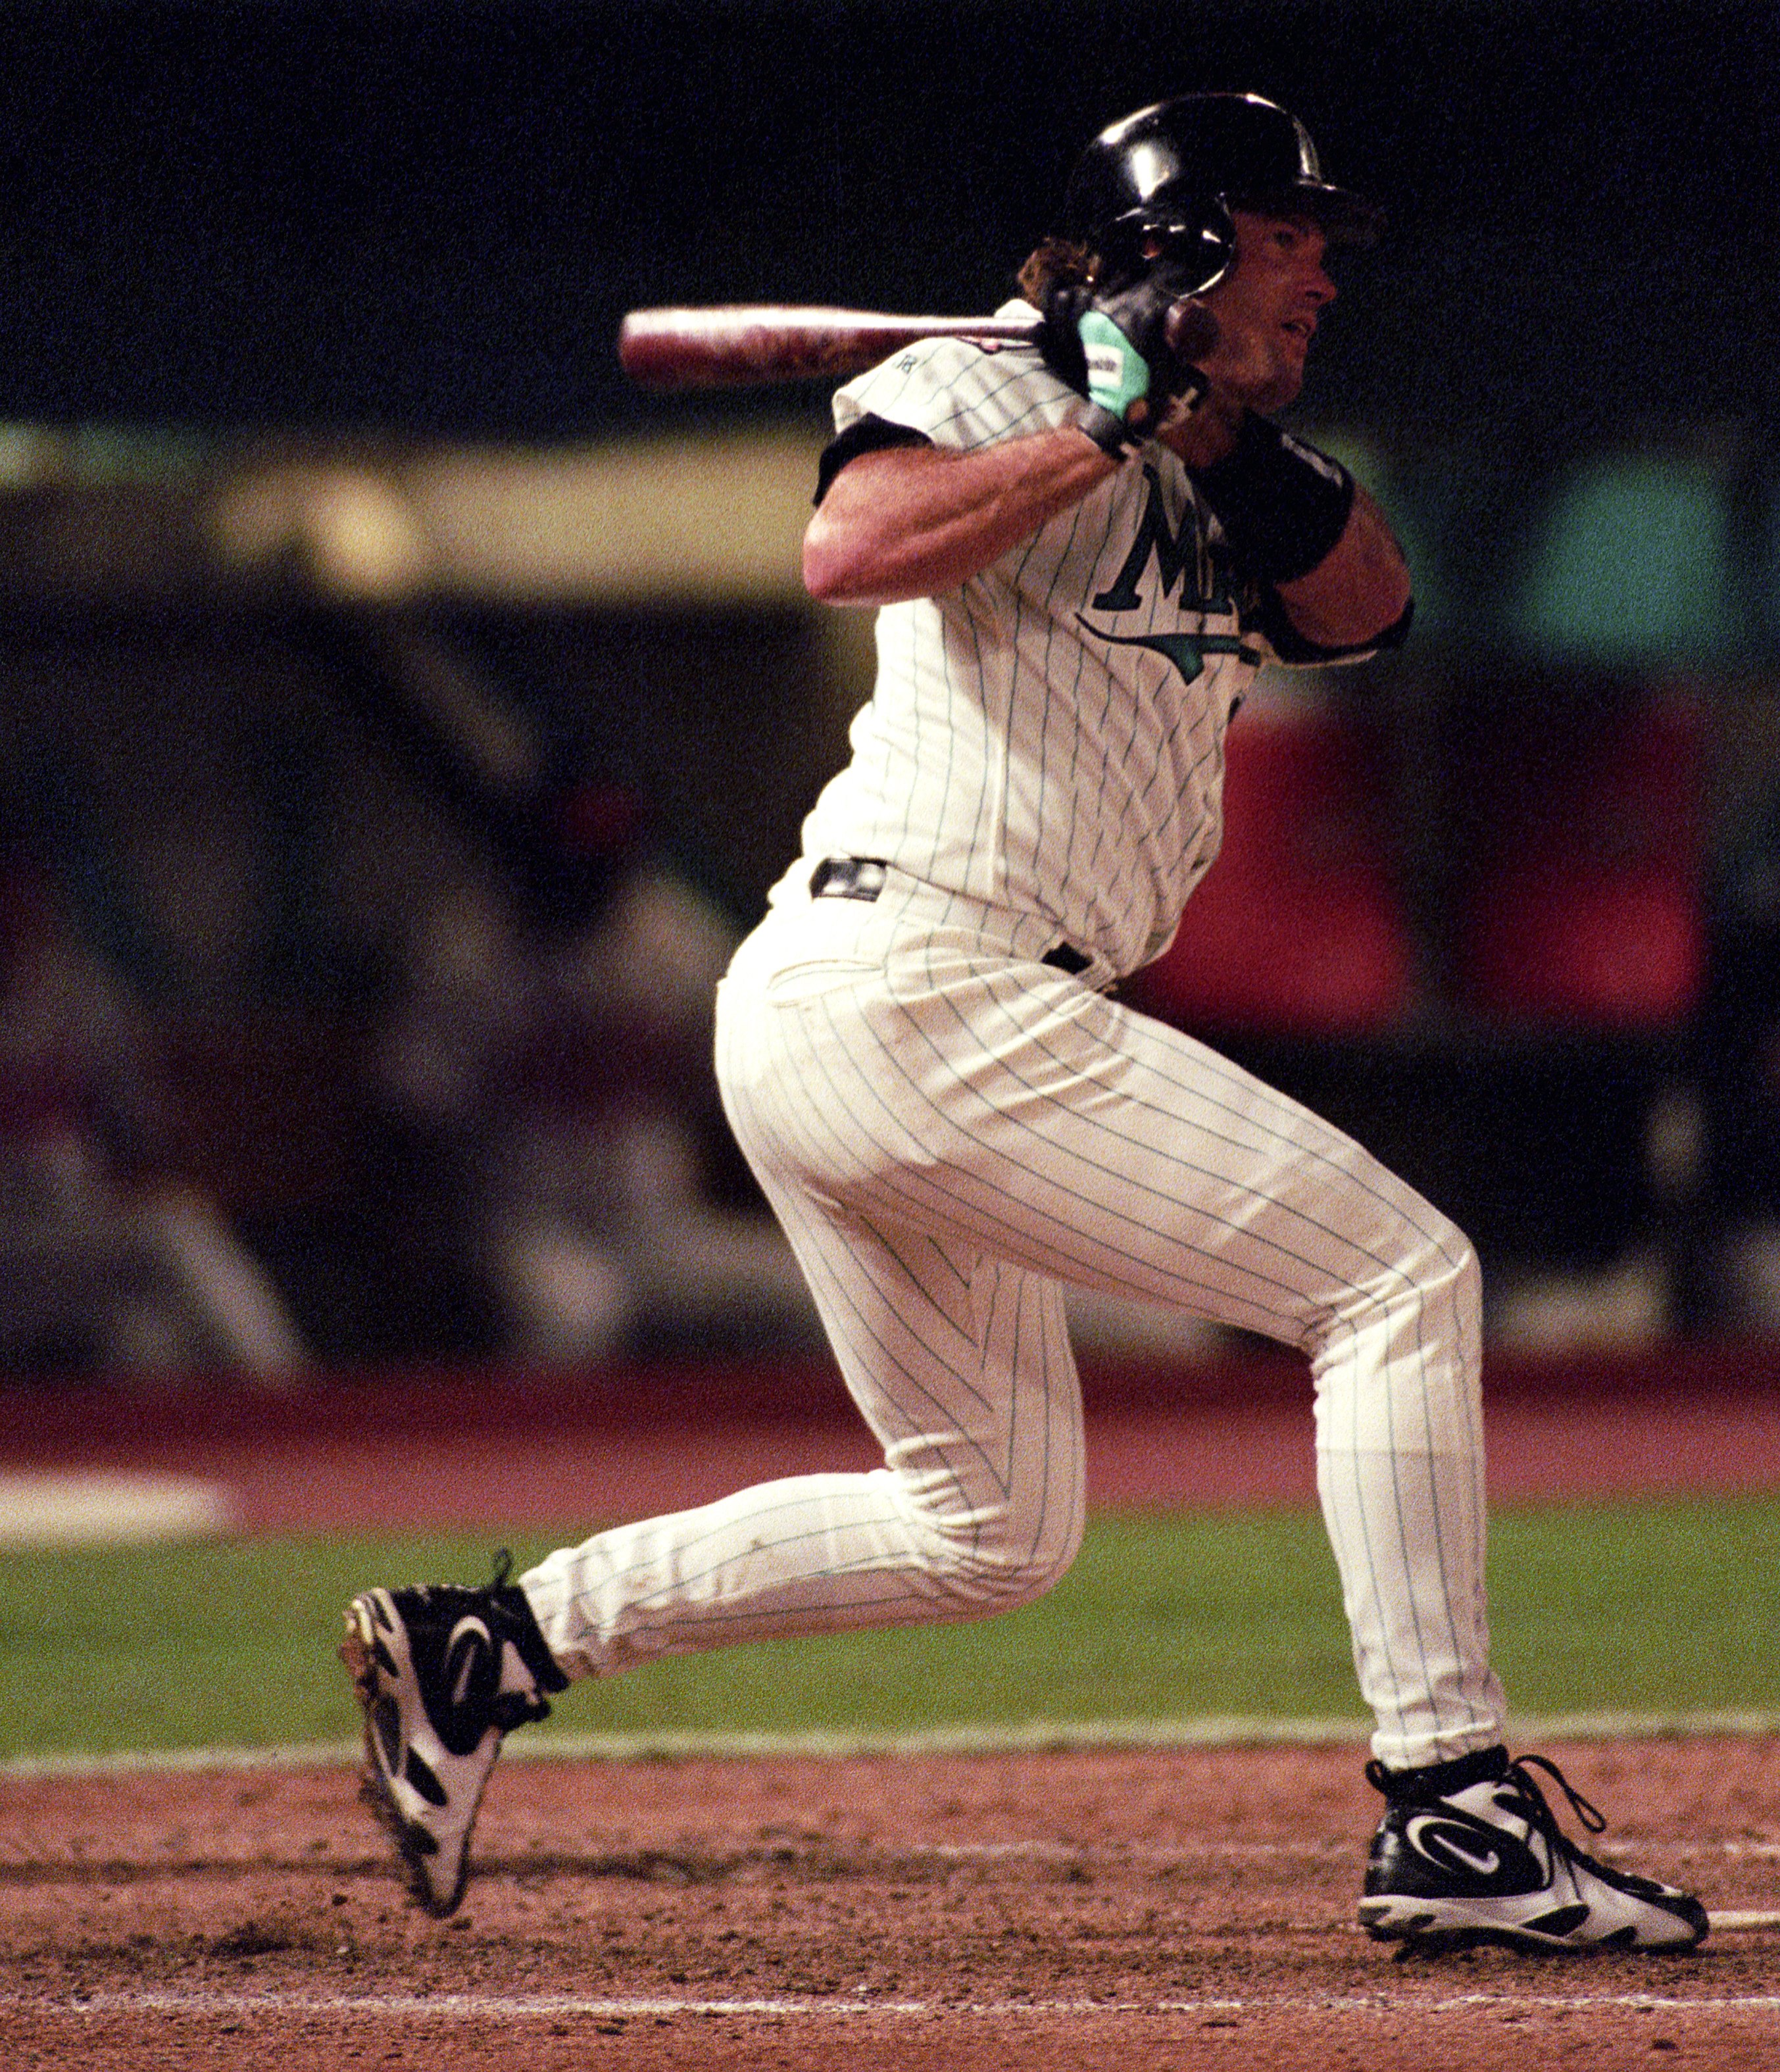 Darren Daulton #20 of the Florida Marlins batting against the Atlanta Braves during Game 3 of the National League Division Series on October 10, 1997 in Miami, Florida.